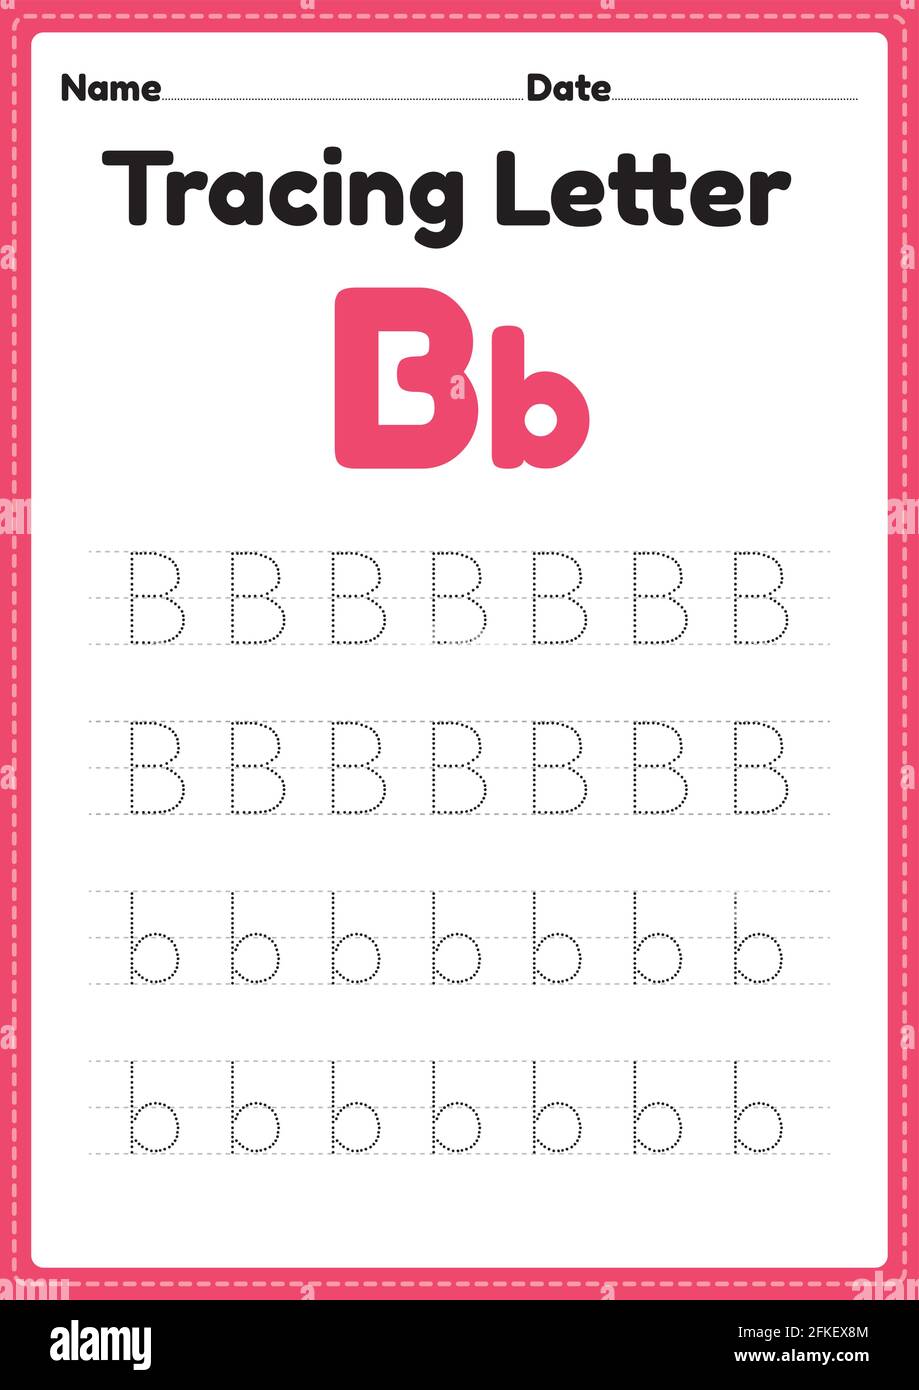 tracing letter b alphabet worksheet for kindergarten and preschool kids for handwriting practice and educational activities in a printable page illust stock vector image art alamy